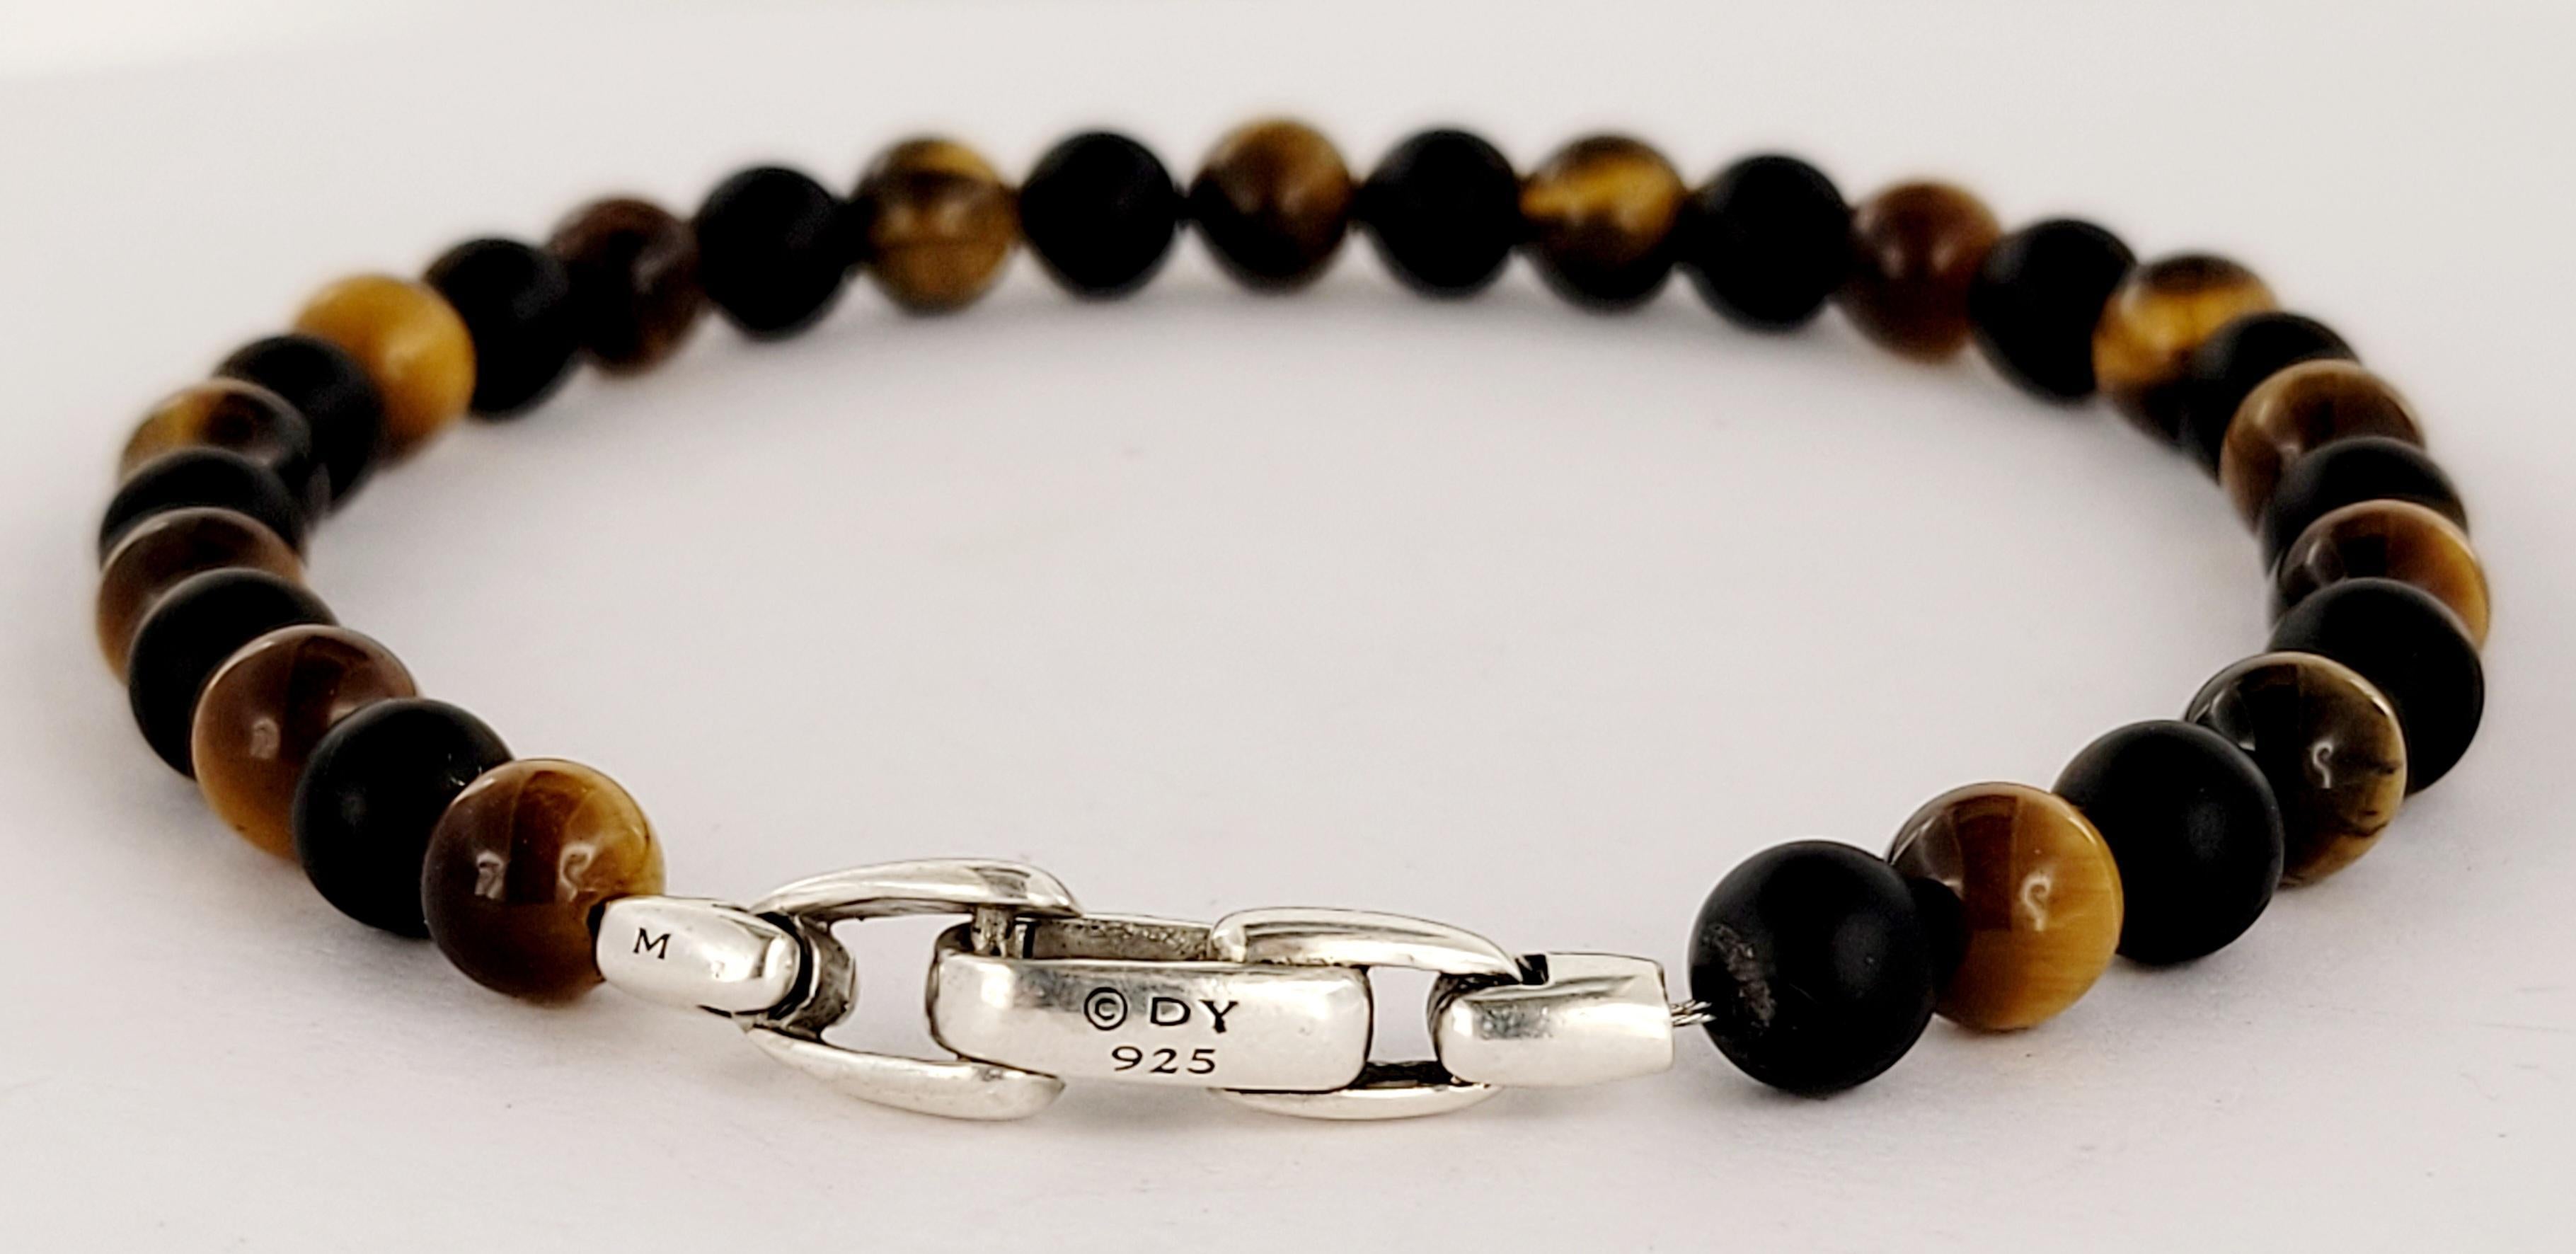 David Yurman Men's Spiritual  Bracelet with Black and Tiger's Eye Beads 6.5mm In New Condition For Sale In New York, NY